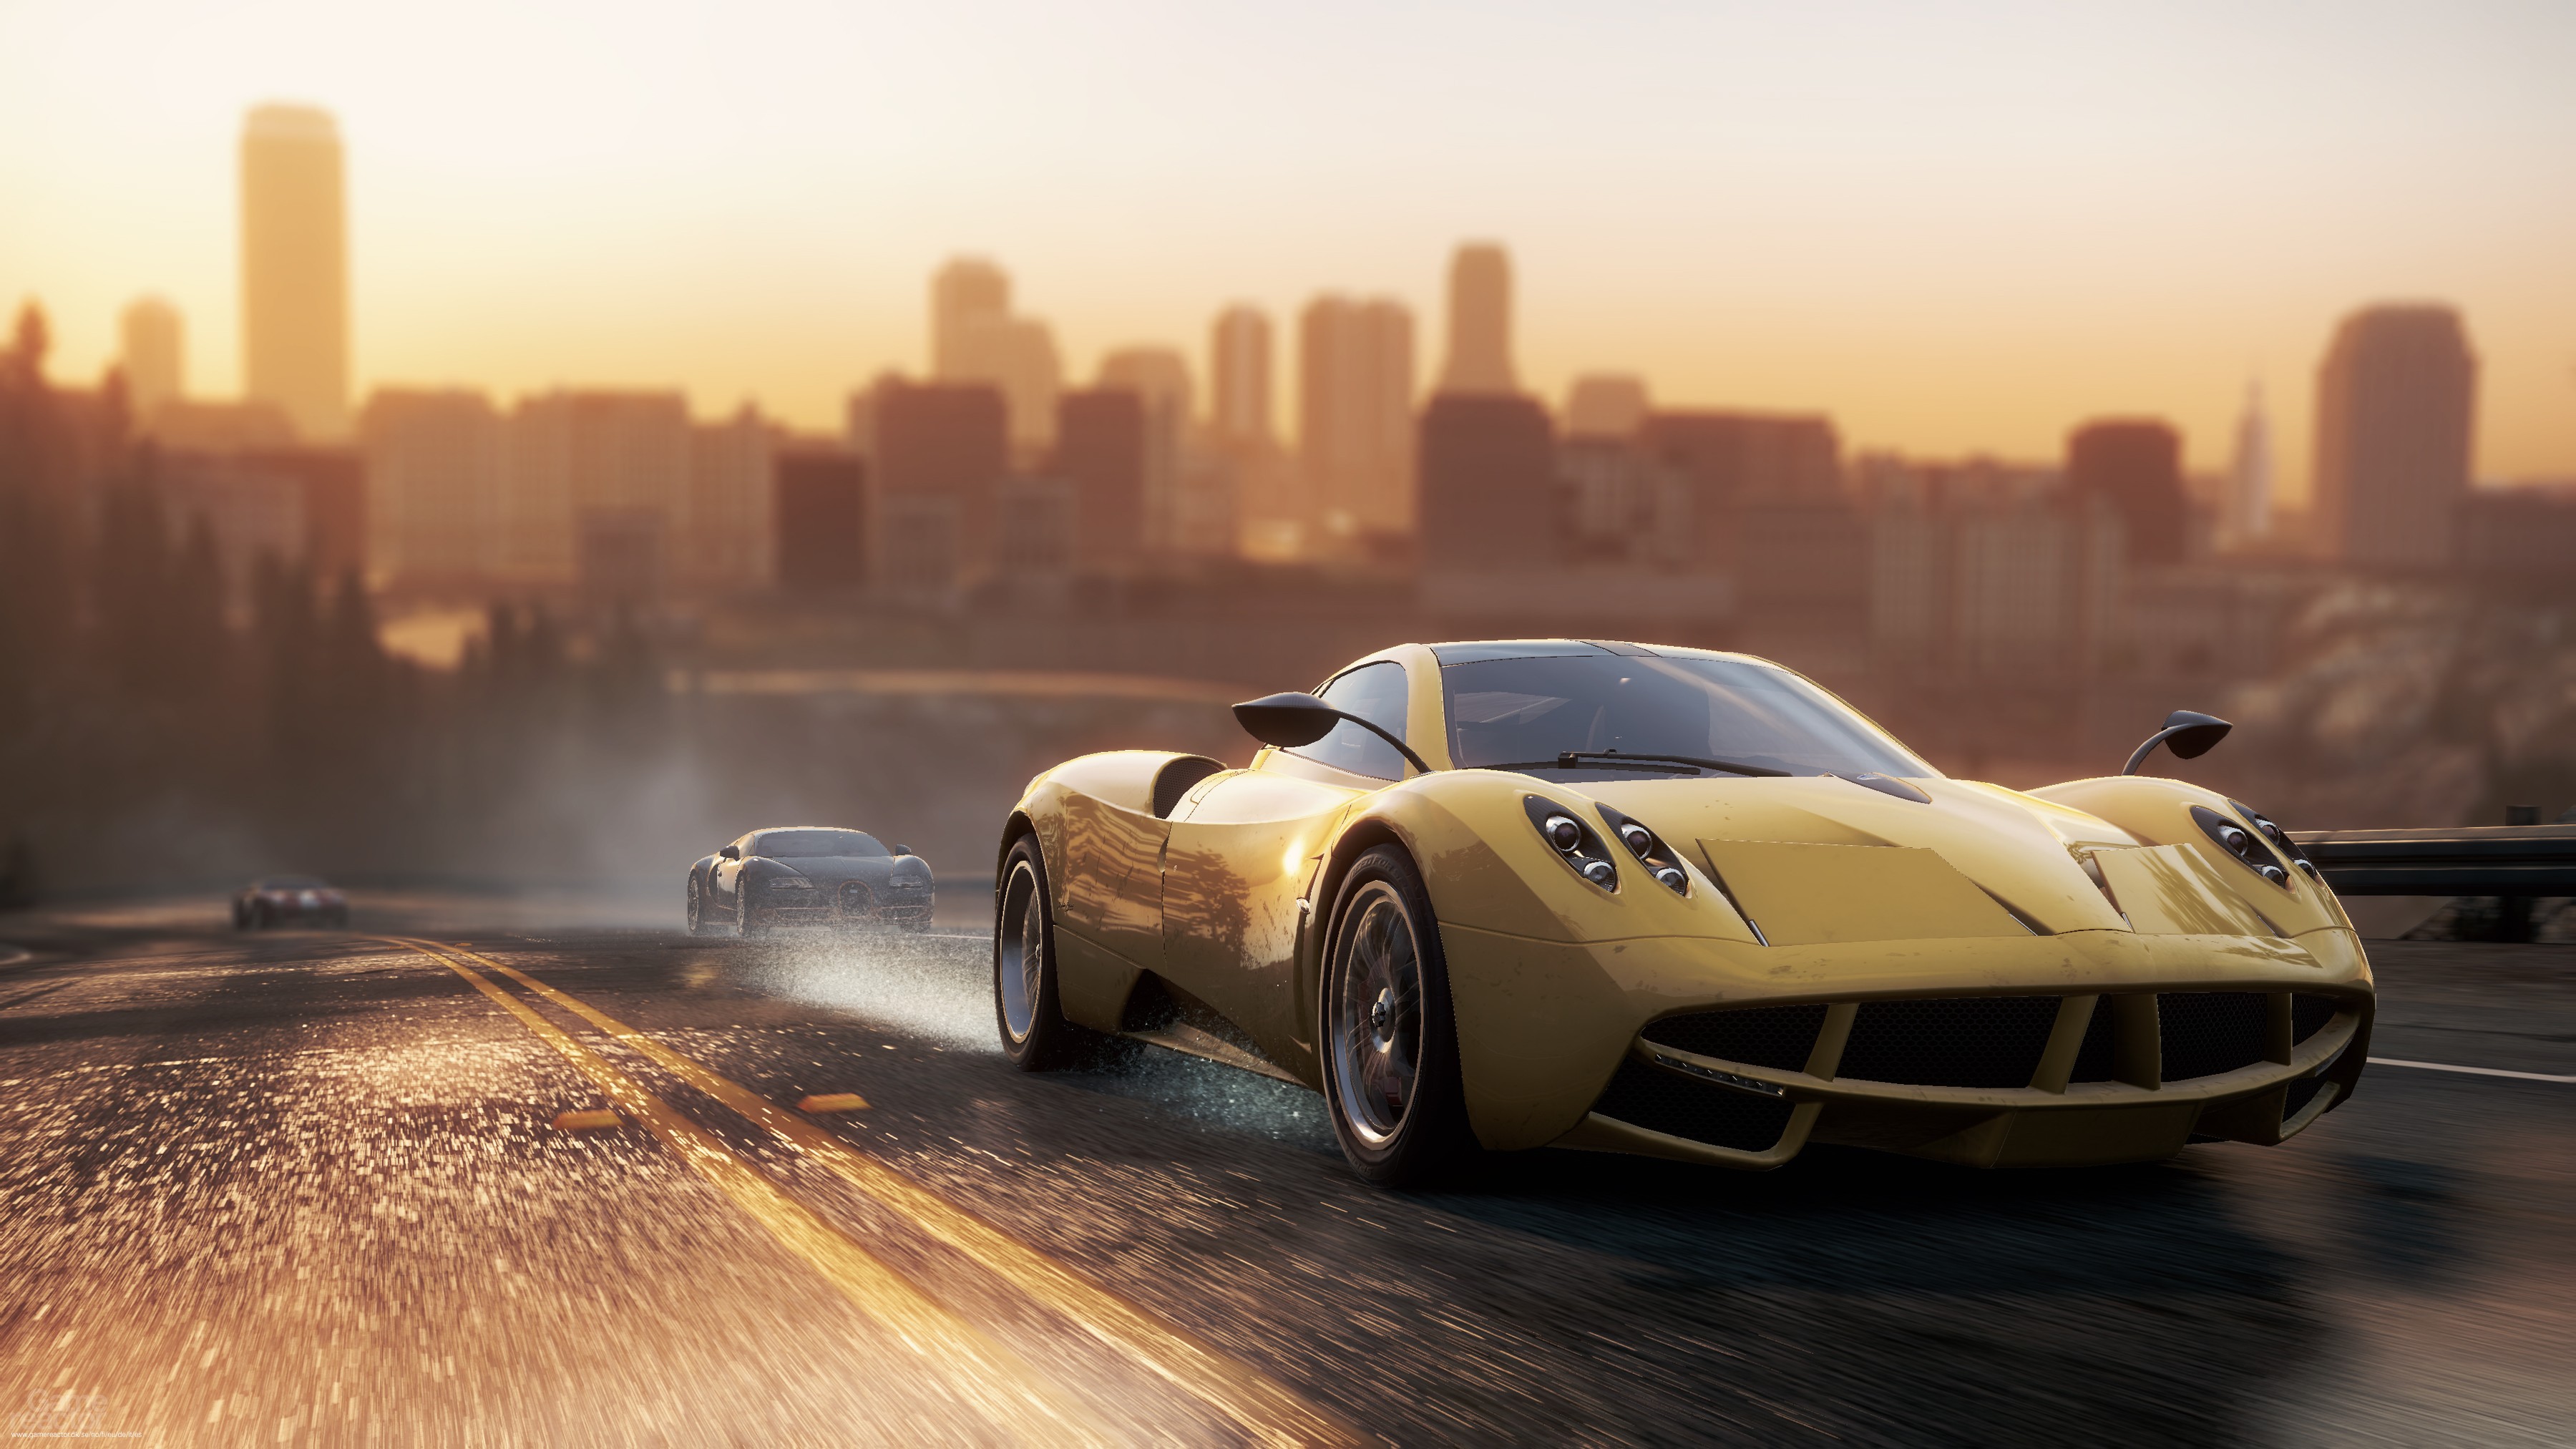 Need for speed wanted game. Need for Speed most wanted 2012 Пагани. Pagani Huayra most wanted 2012. Нфс мост вантед 2. NFS 2012.